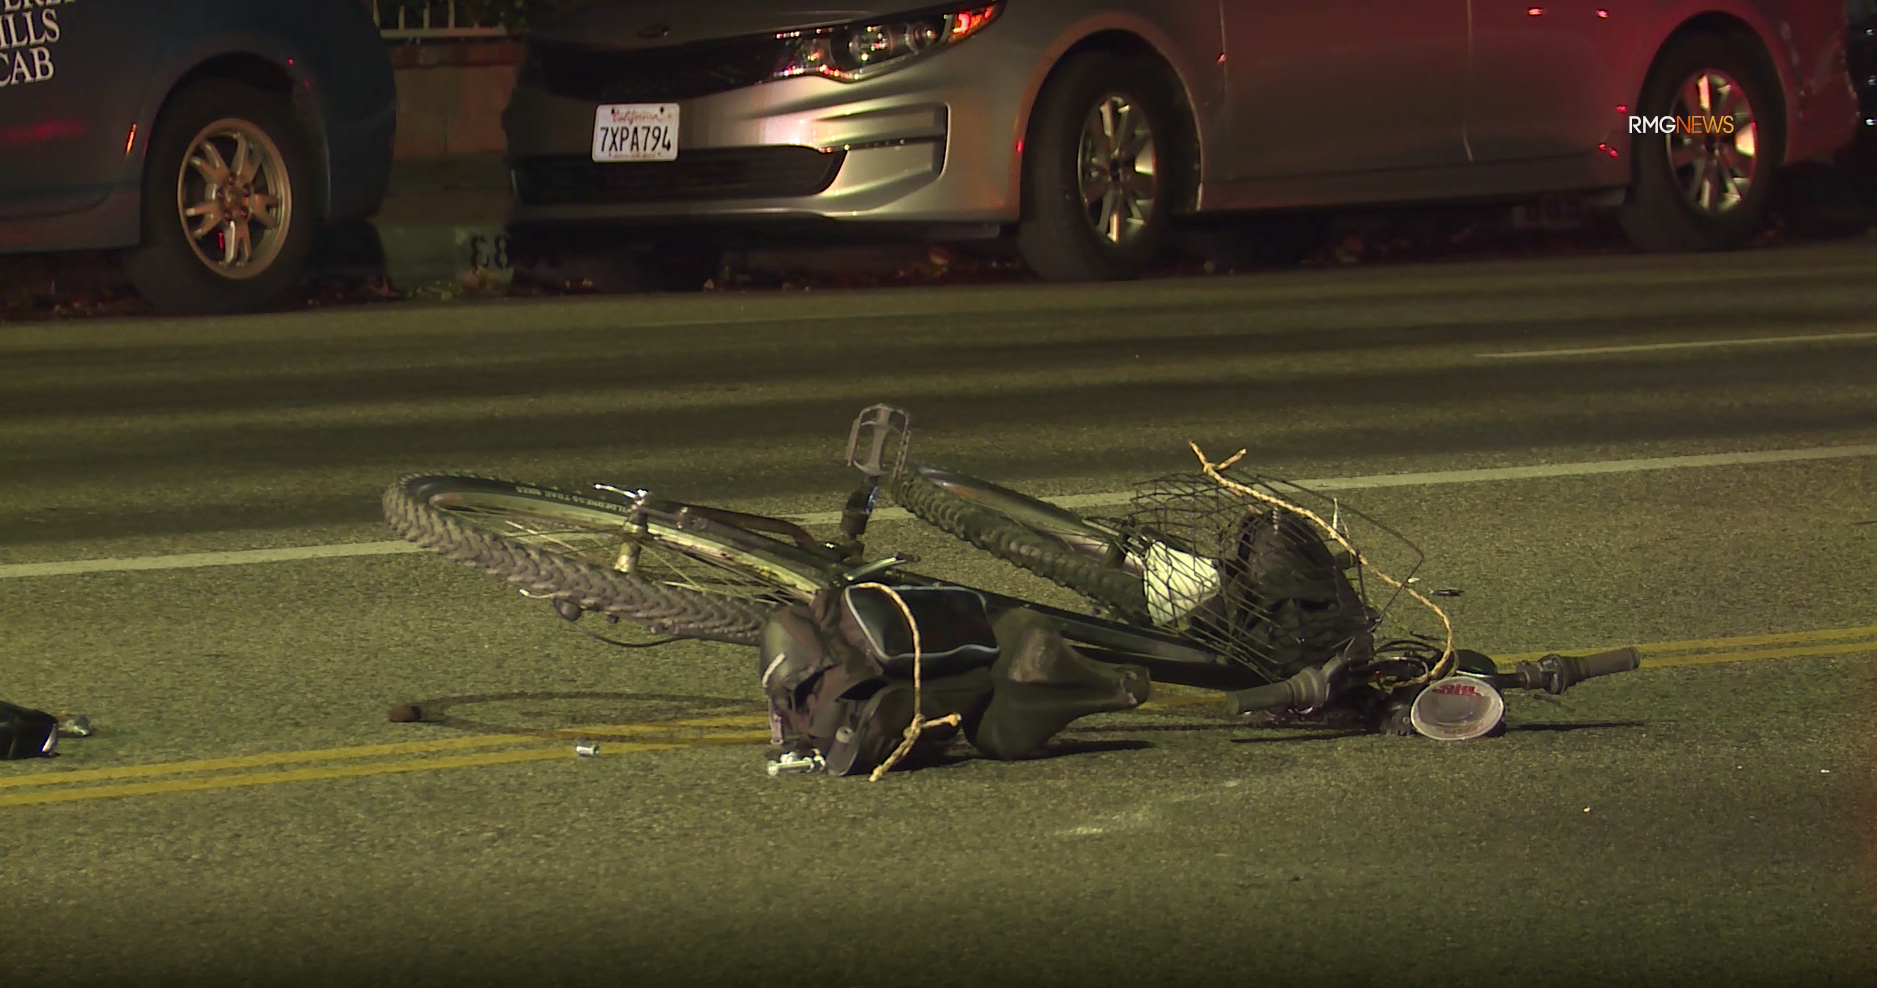 Bicyclist Fatally Struck by Vehicle